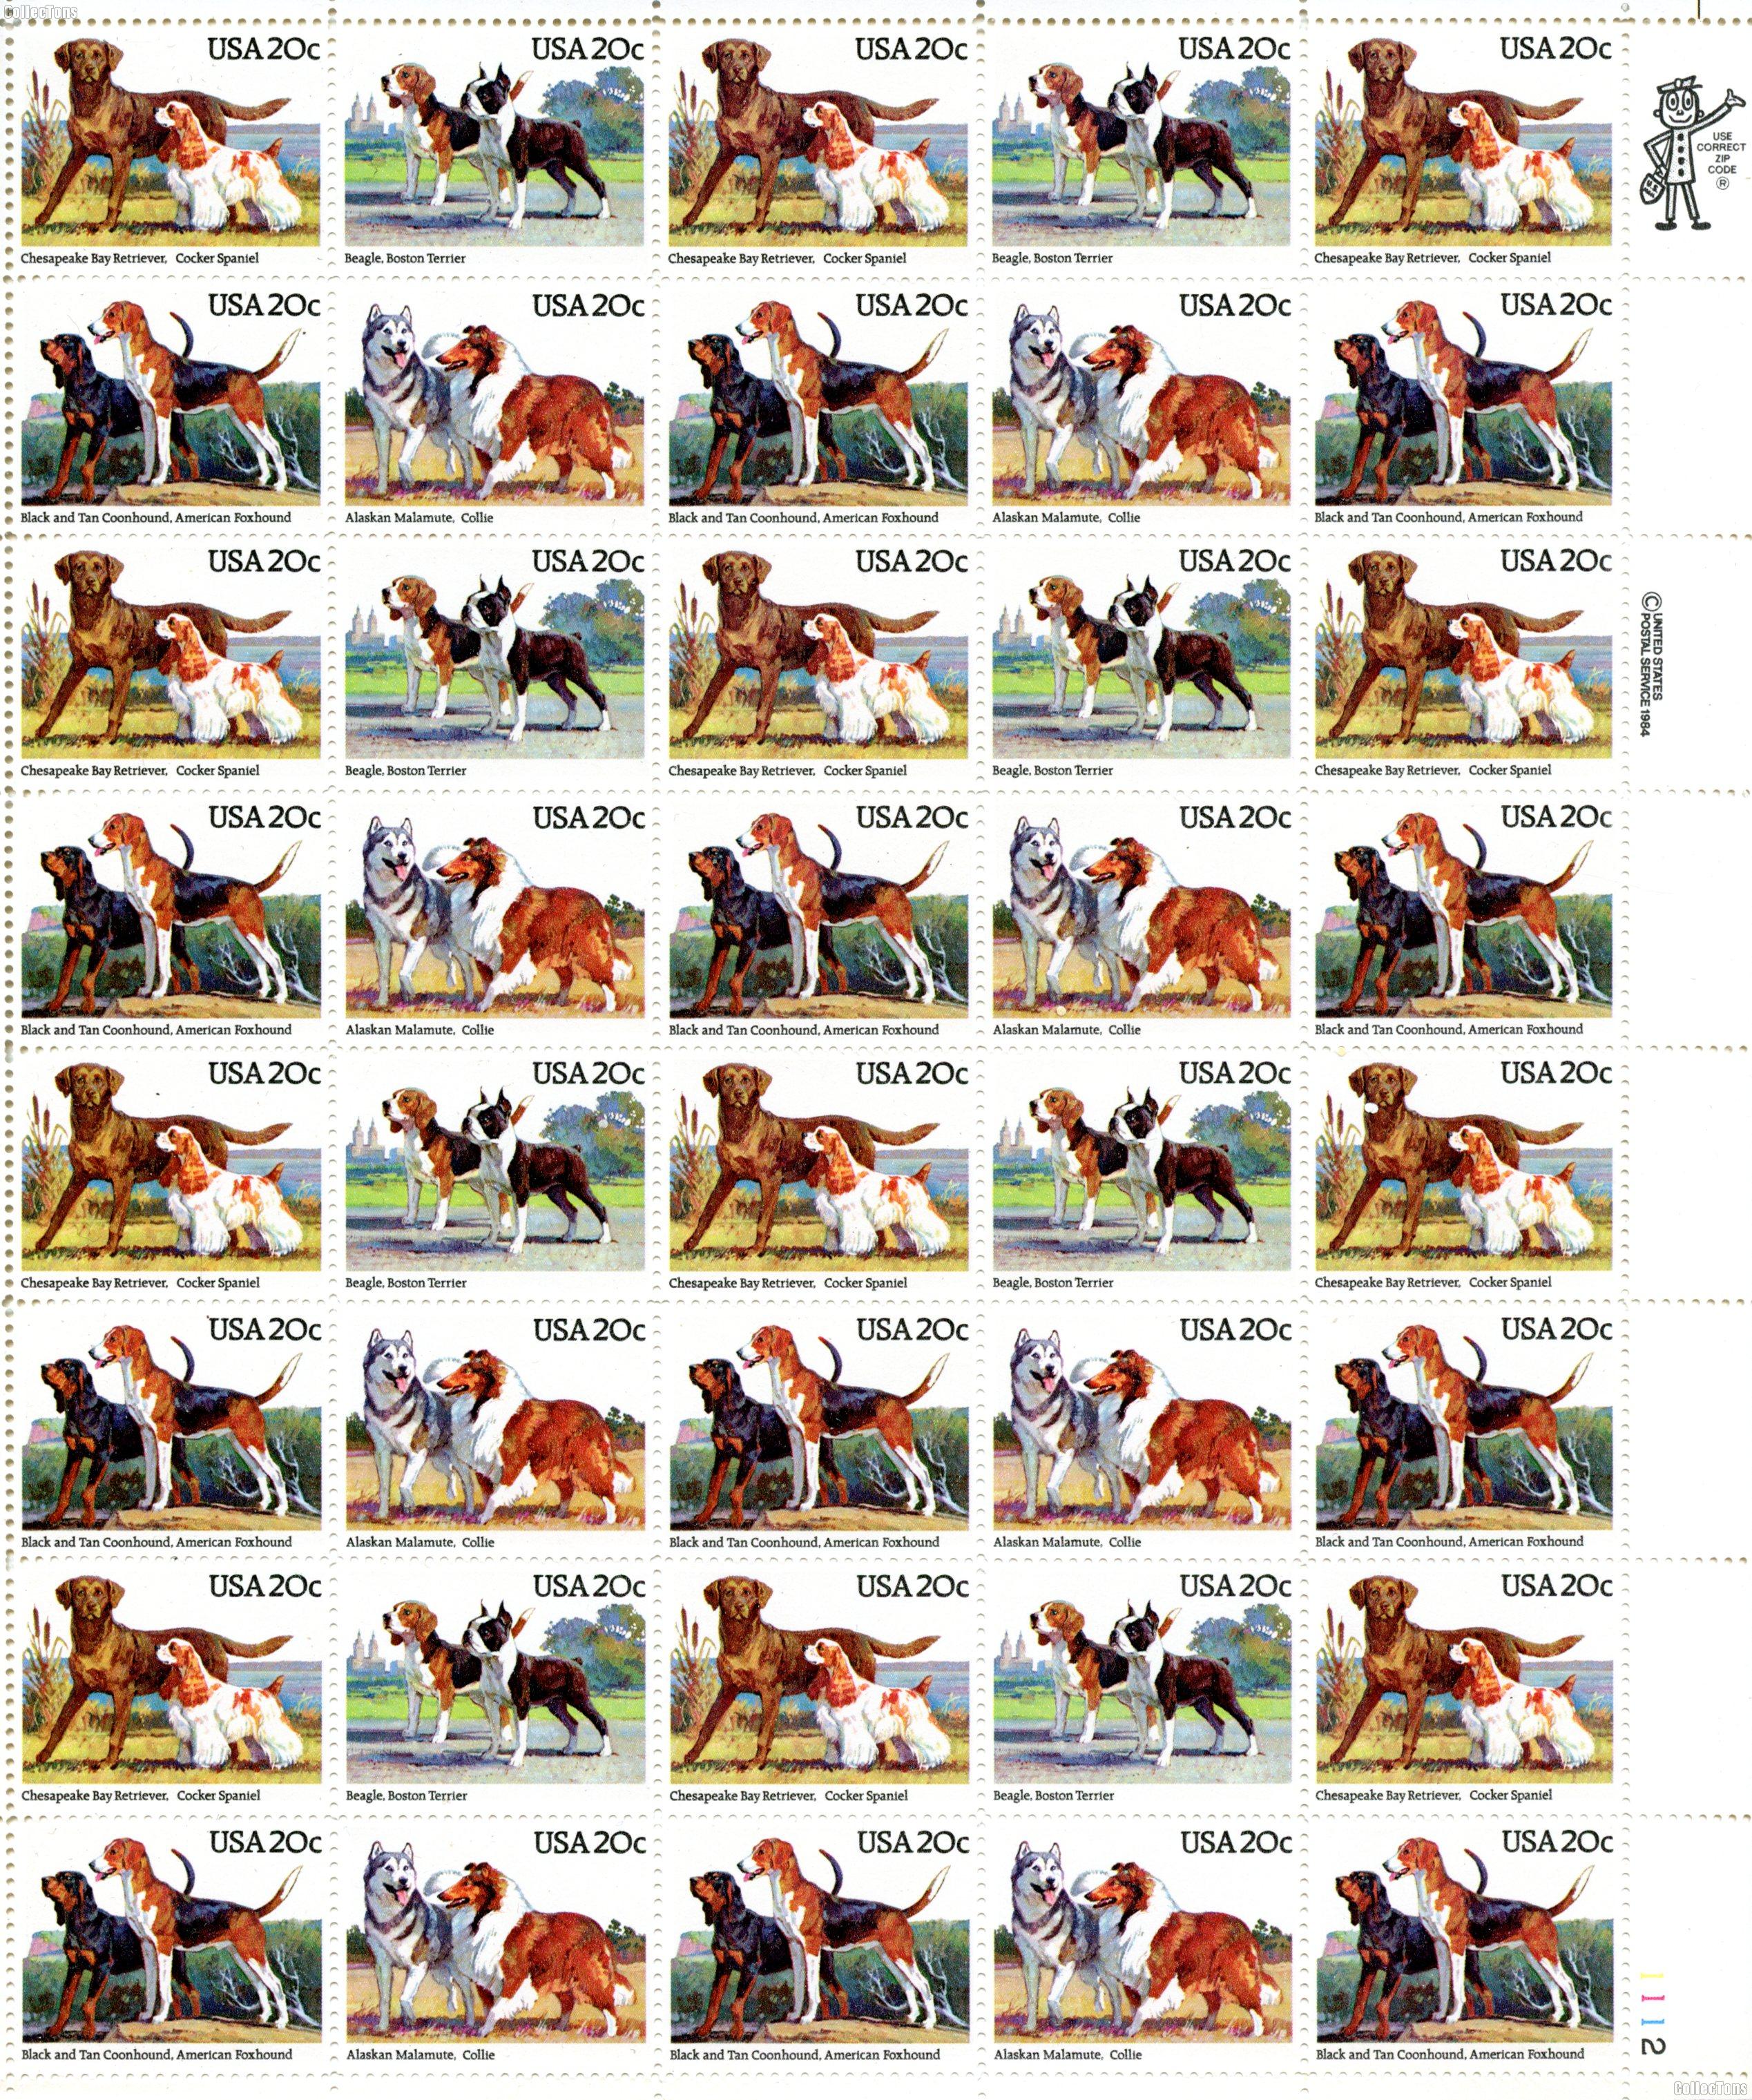 1984 Dogs 20 Cent US Postage Stamp MNH Sheet of 50 Scott #2098-2101